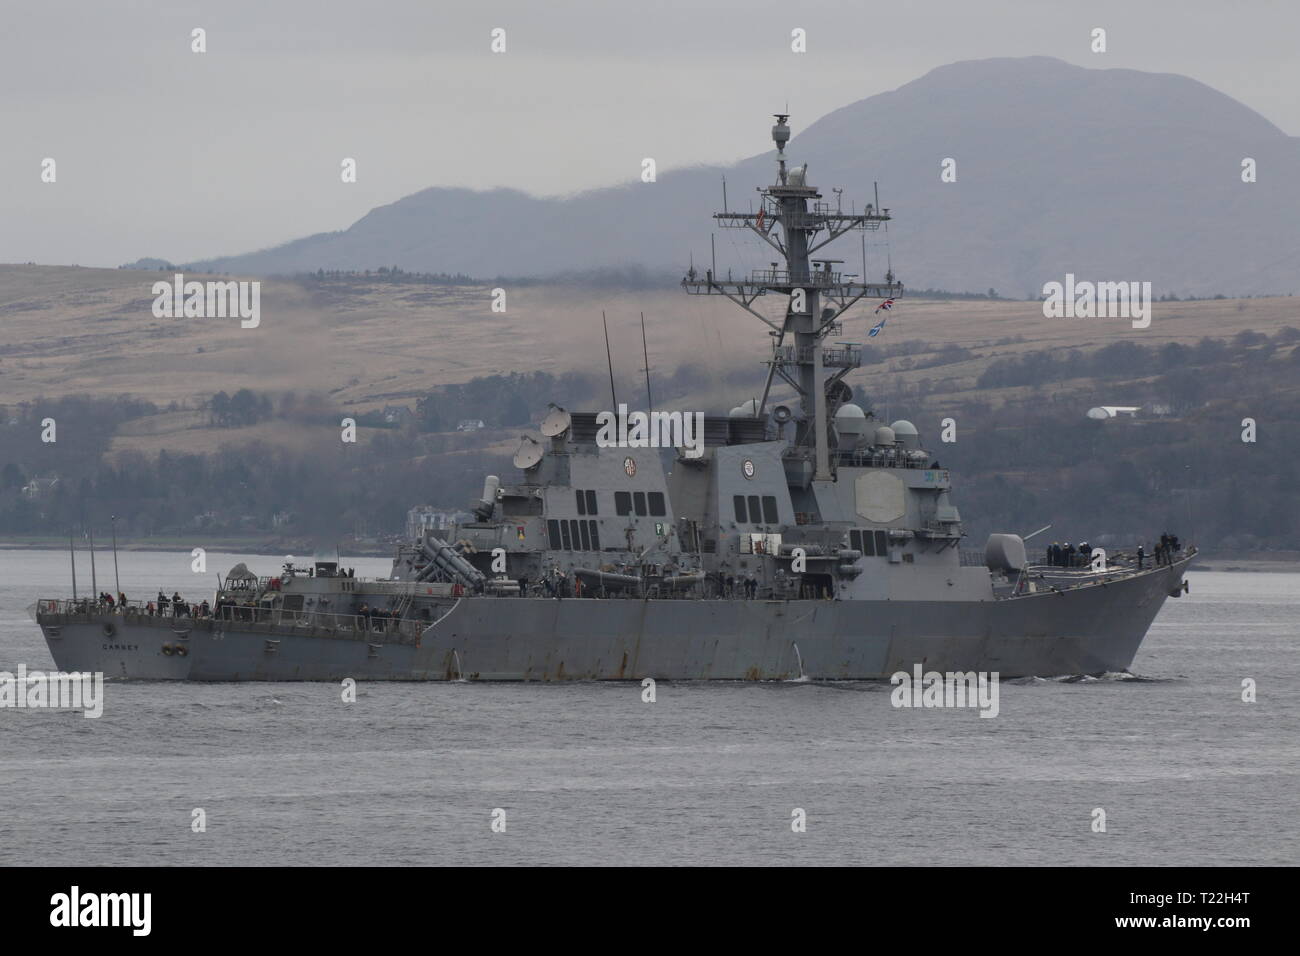 Alamy (DDG-64), Burke-class by the operated on arrival (Flight passing for Gourock USS US Photo Warrior Exercise - Carney Joint Navy, Arleigh Stock I) an destroyer 19-1